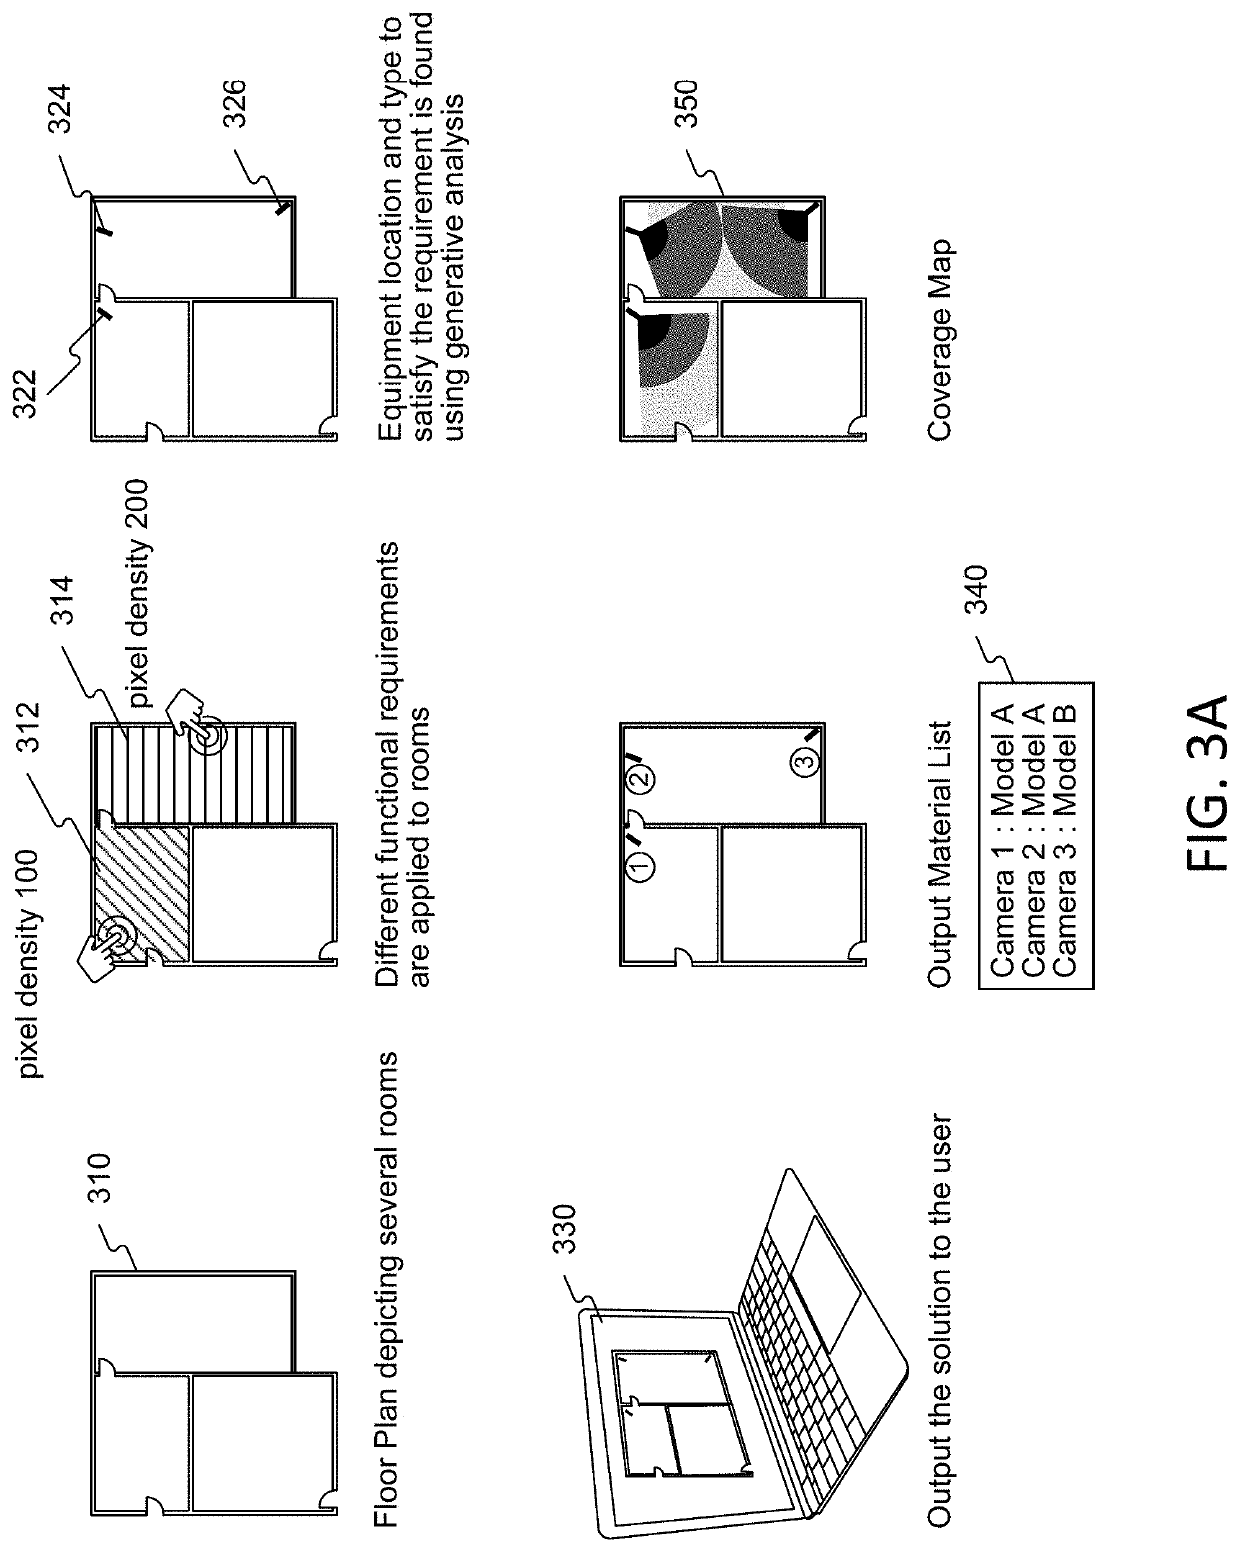 Structural design systems and methods for optimizing equipment selection in floorplans using modeling and simulation